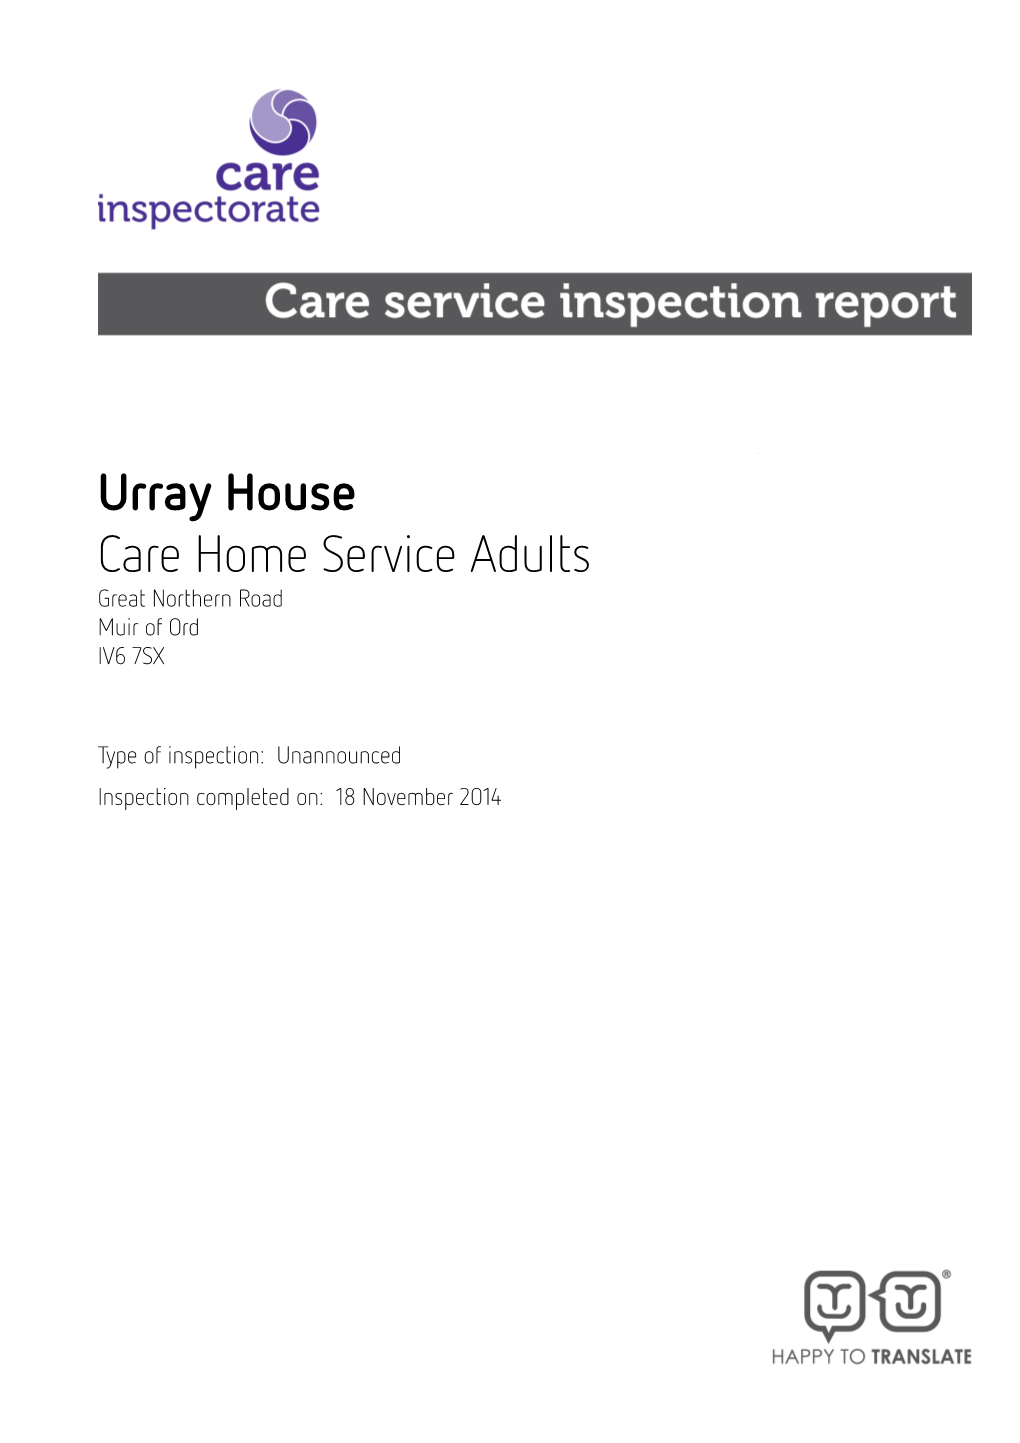 Urray House Care Home Service Adults Great Northern Road Muir of Ord IV6 7SX